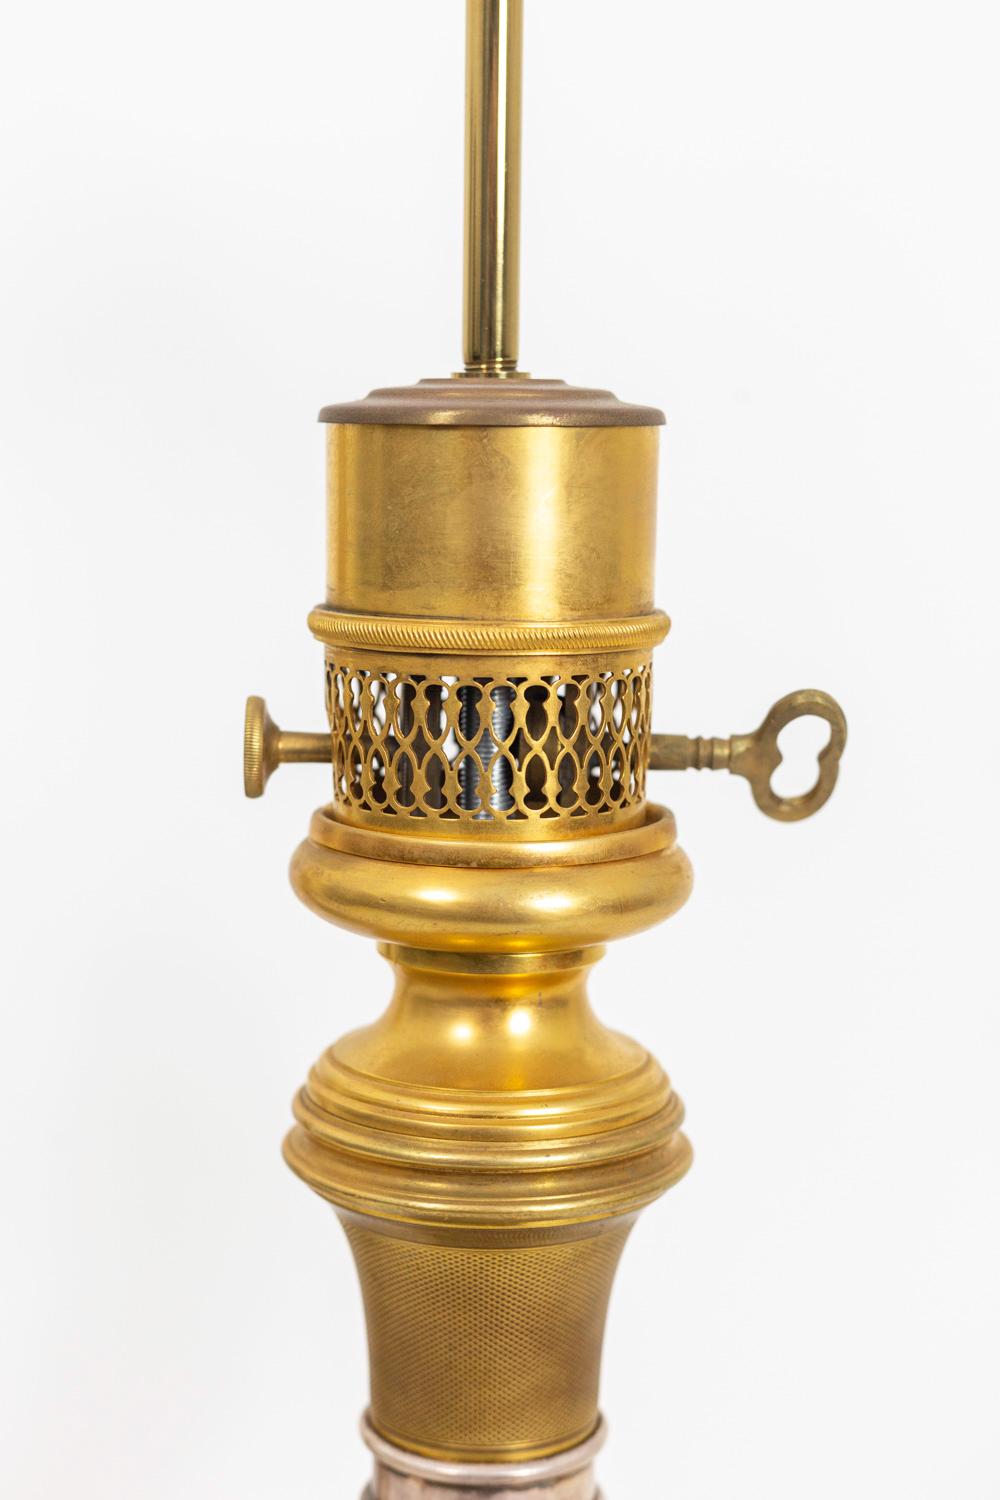 European Maison Gagneau, Pair of Lamp in Guilloche Gilt Brass, Late 19th Century For Sale